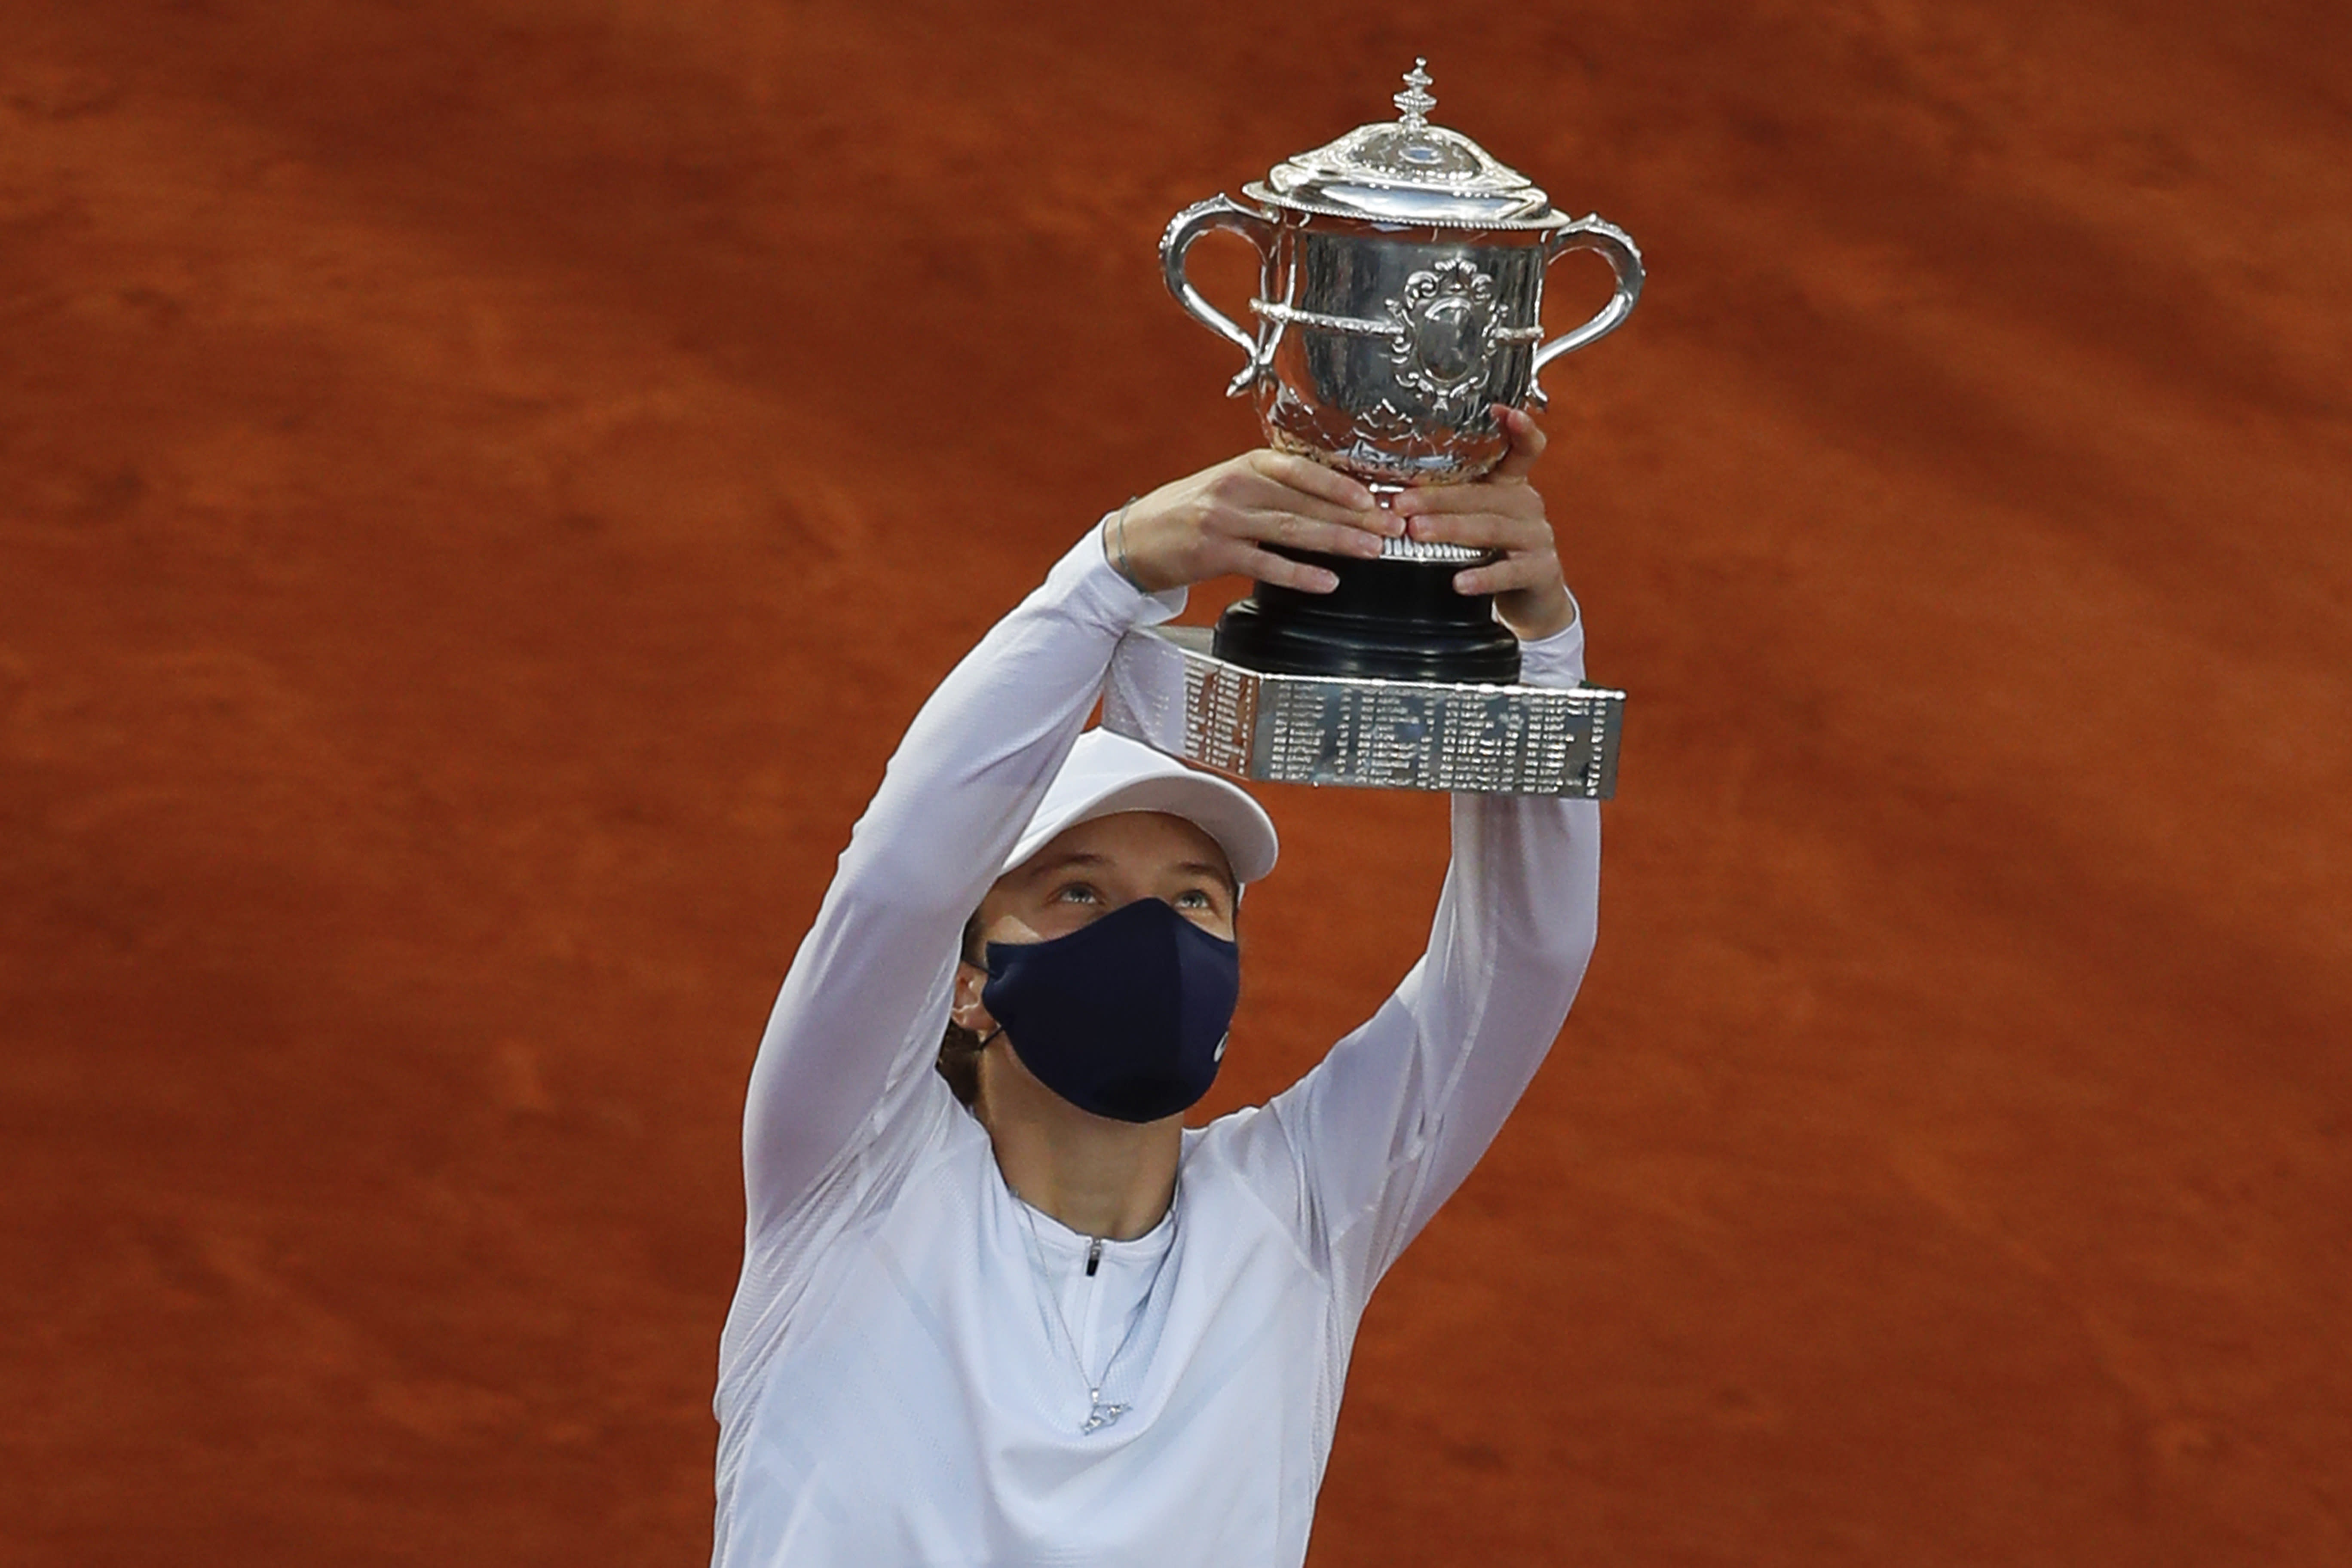 Just 19, ranked 54th, Swiatek wins French Open for 1st Slam